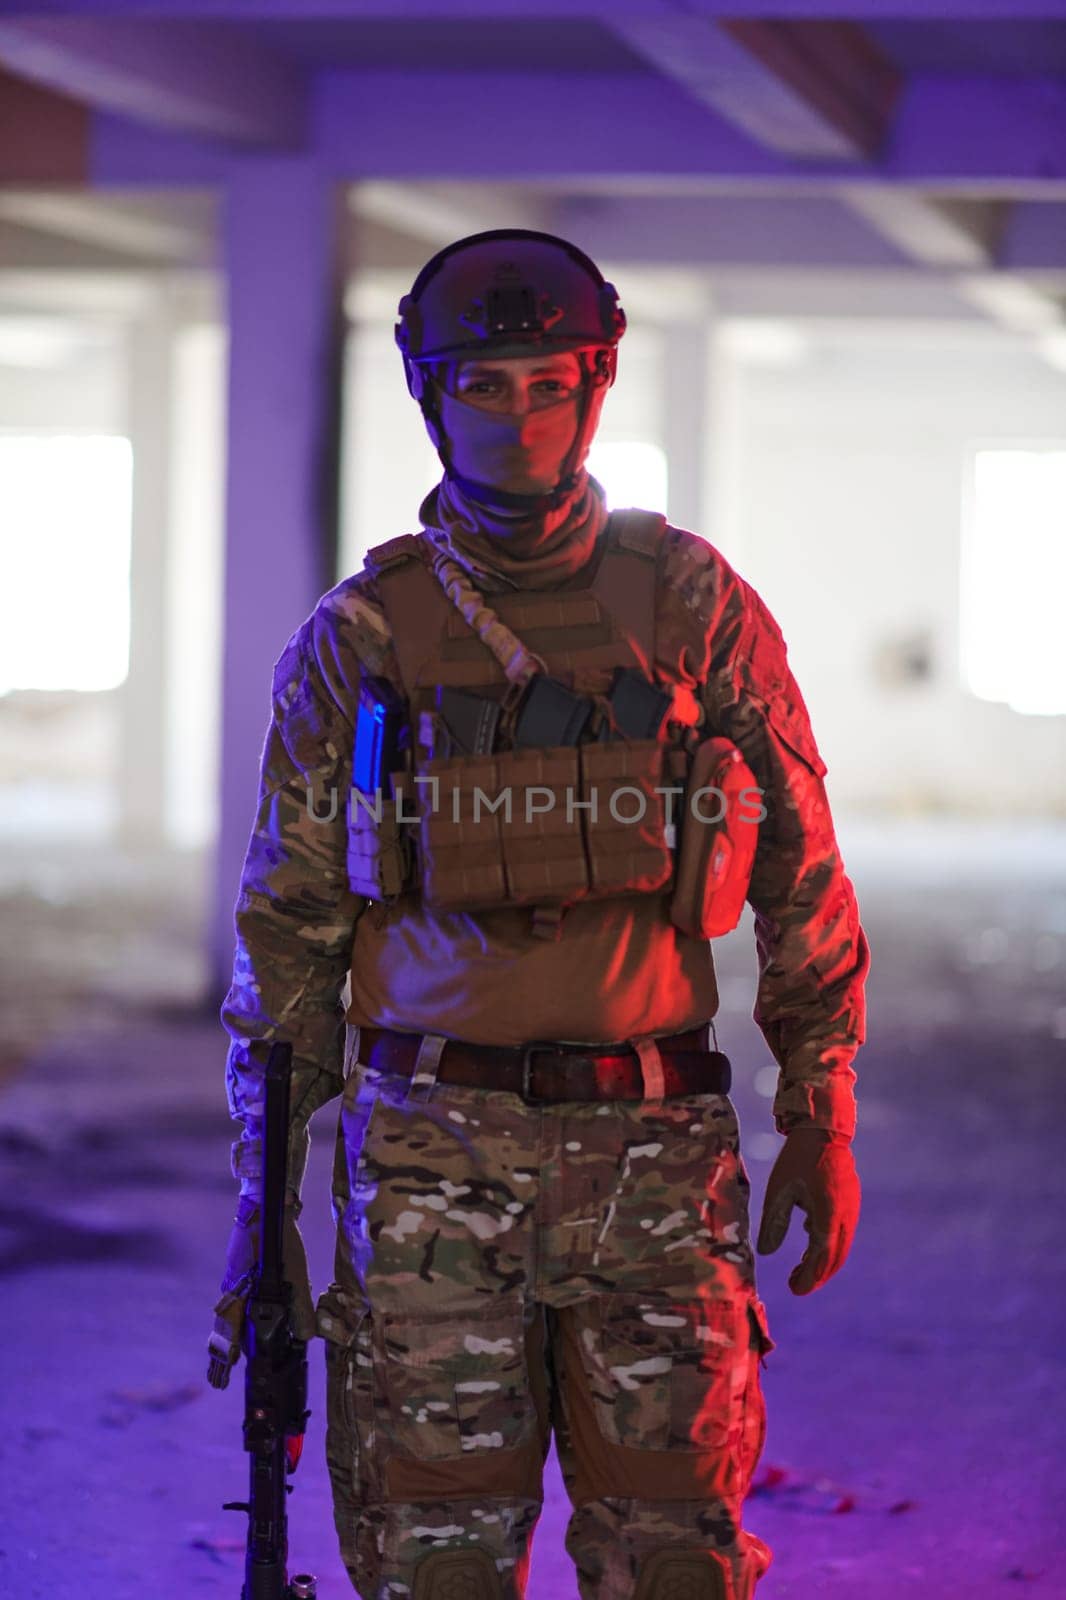 A professional soldier undertakes a perilous mission in an abandoned building illuminated by neon blue and purple lights by dotshock